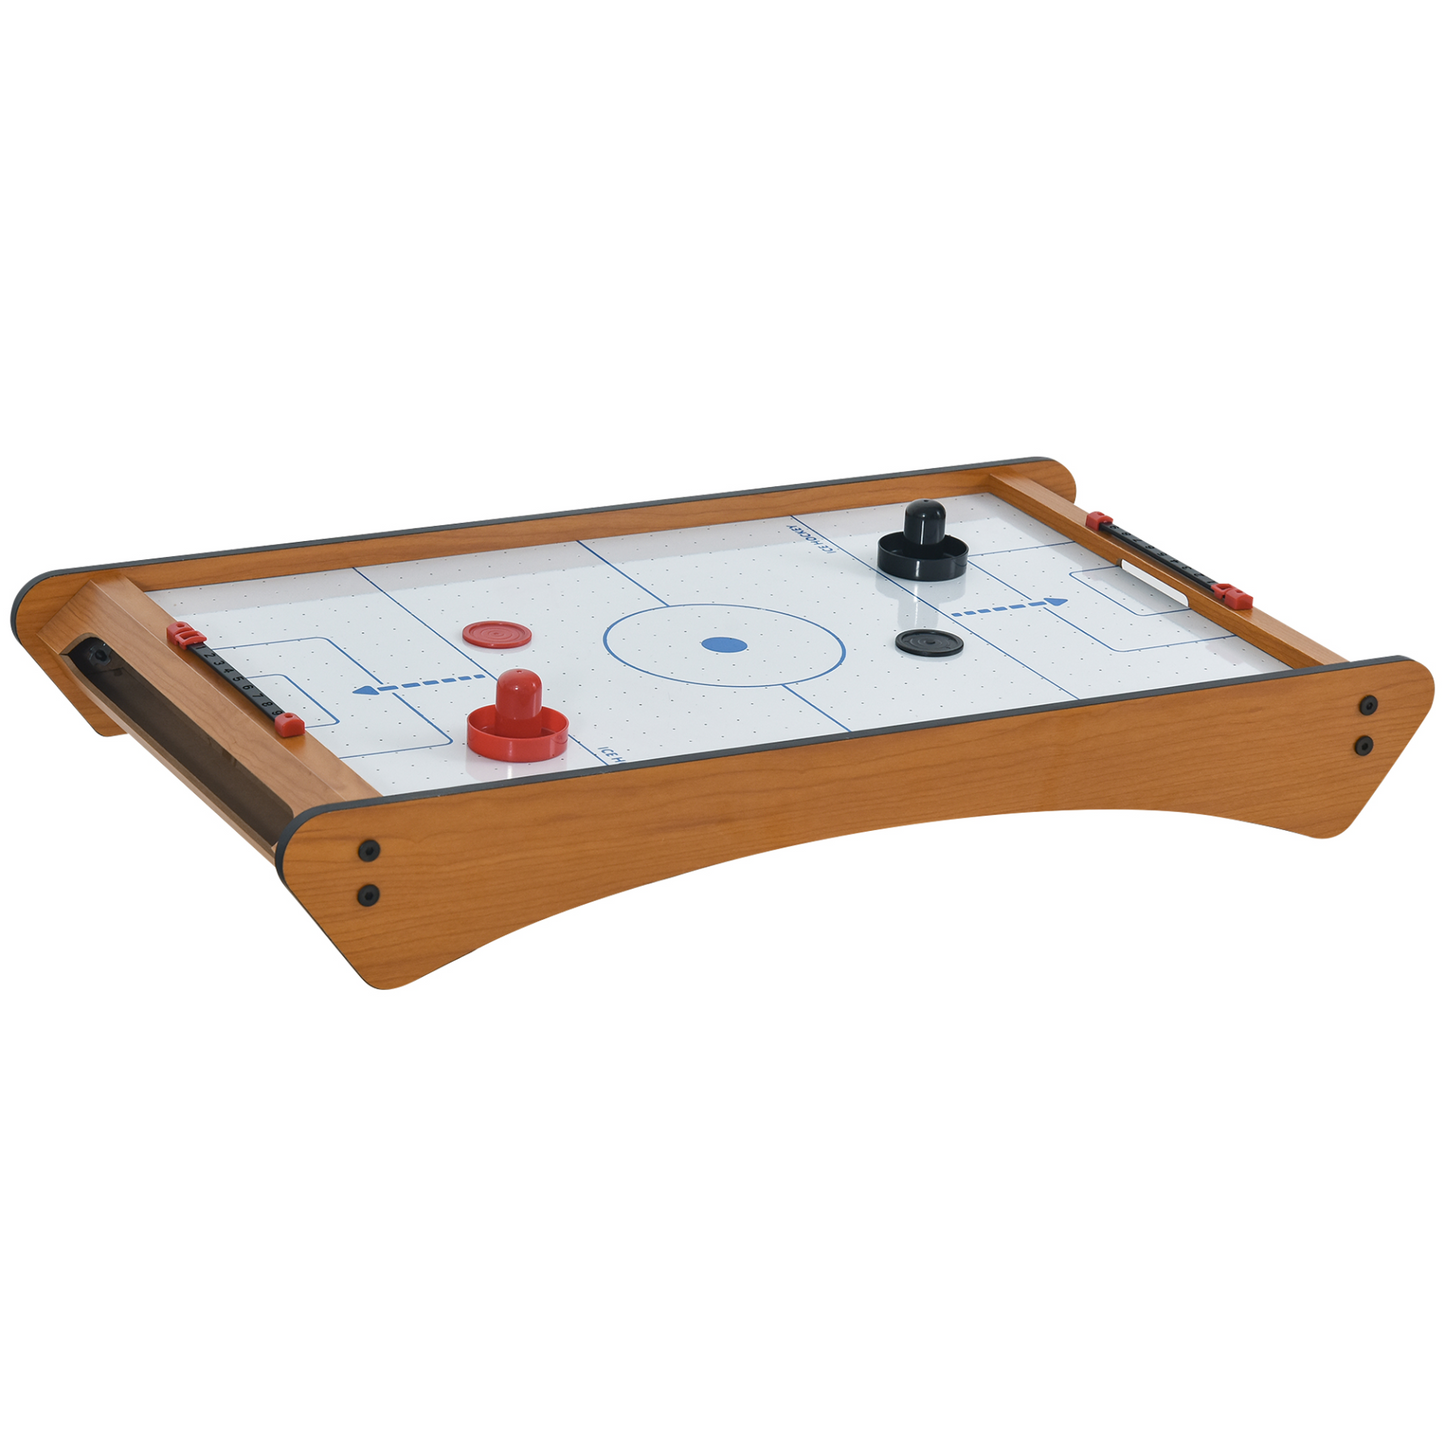 HOMCOM 2.5FT Tabletop Air Hockey Game Table Wooden Portable Party Gaming Toy for Kids Children Adult